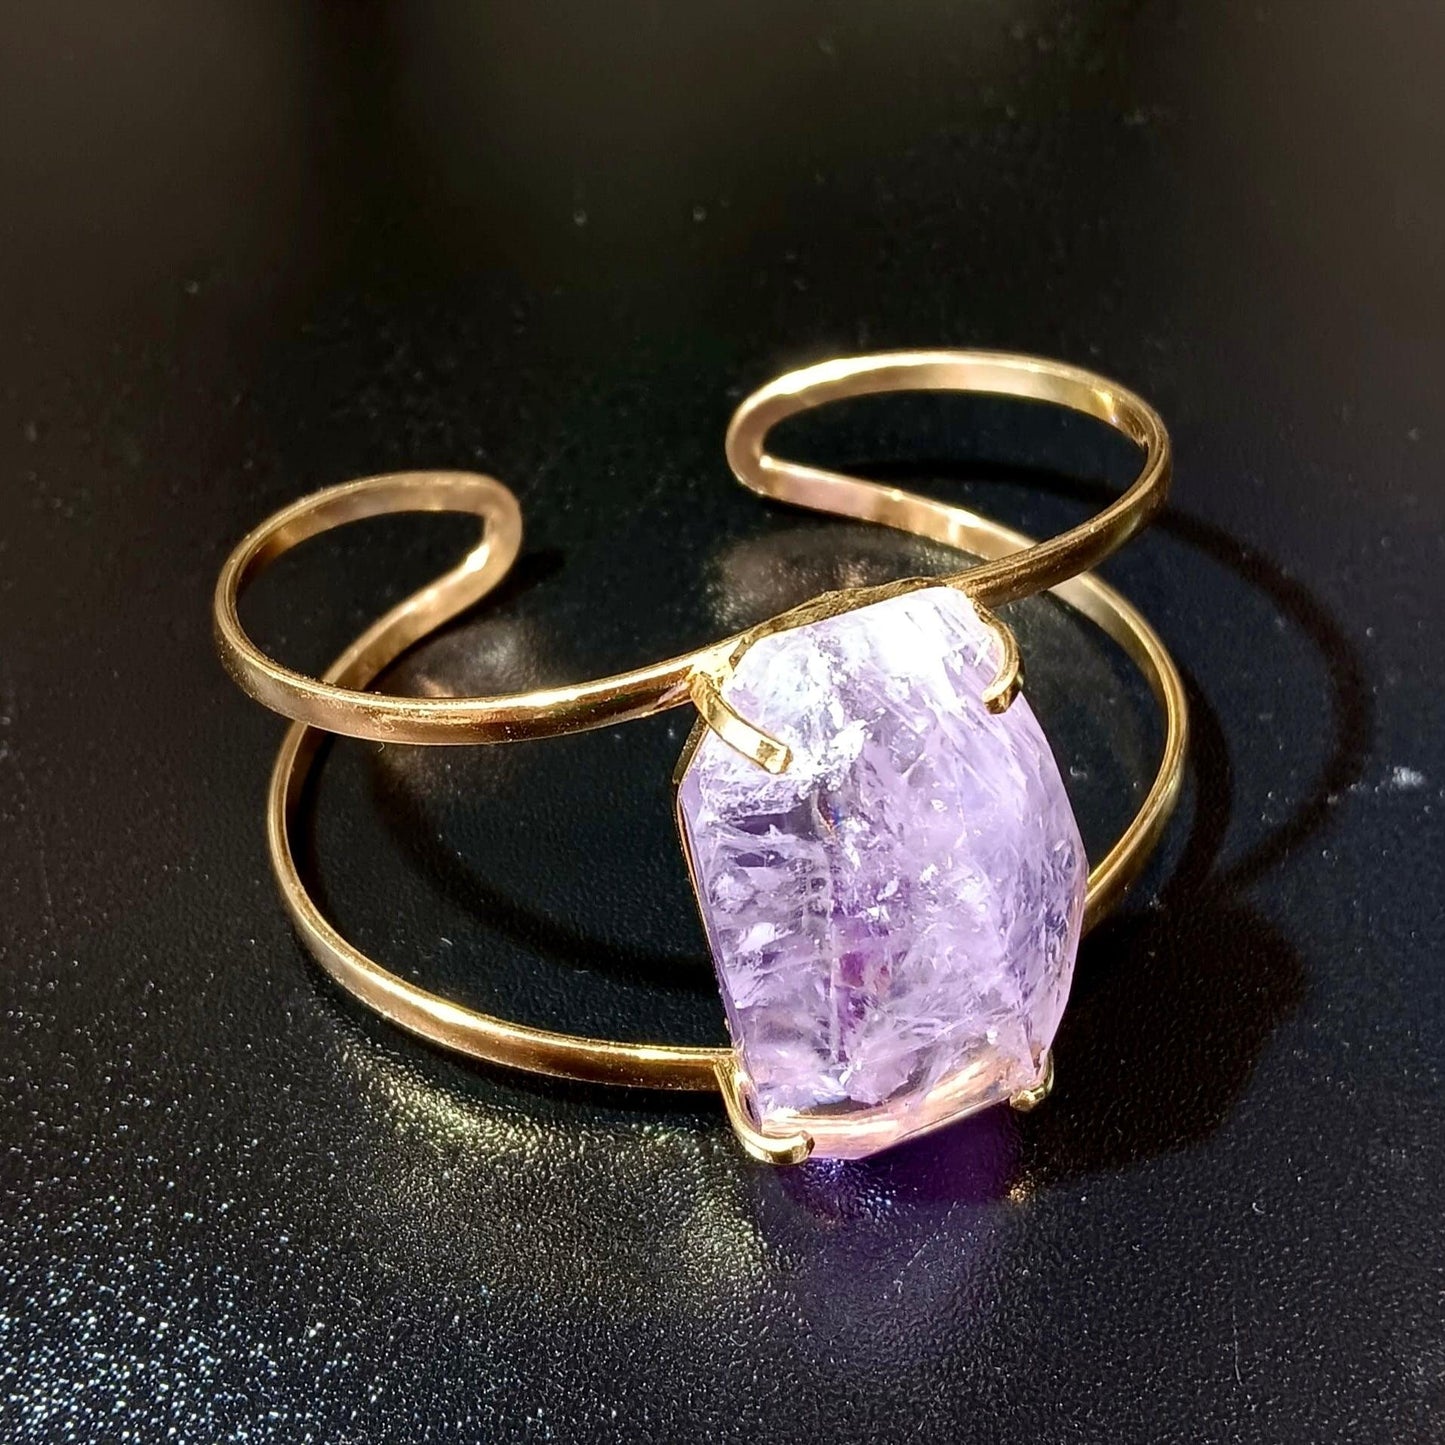 Amethyst Faceted Arc Bracelet - The Harmony Store